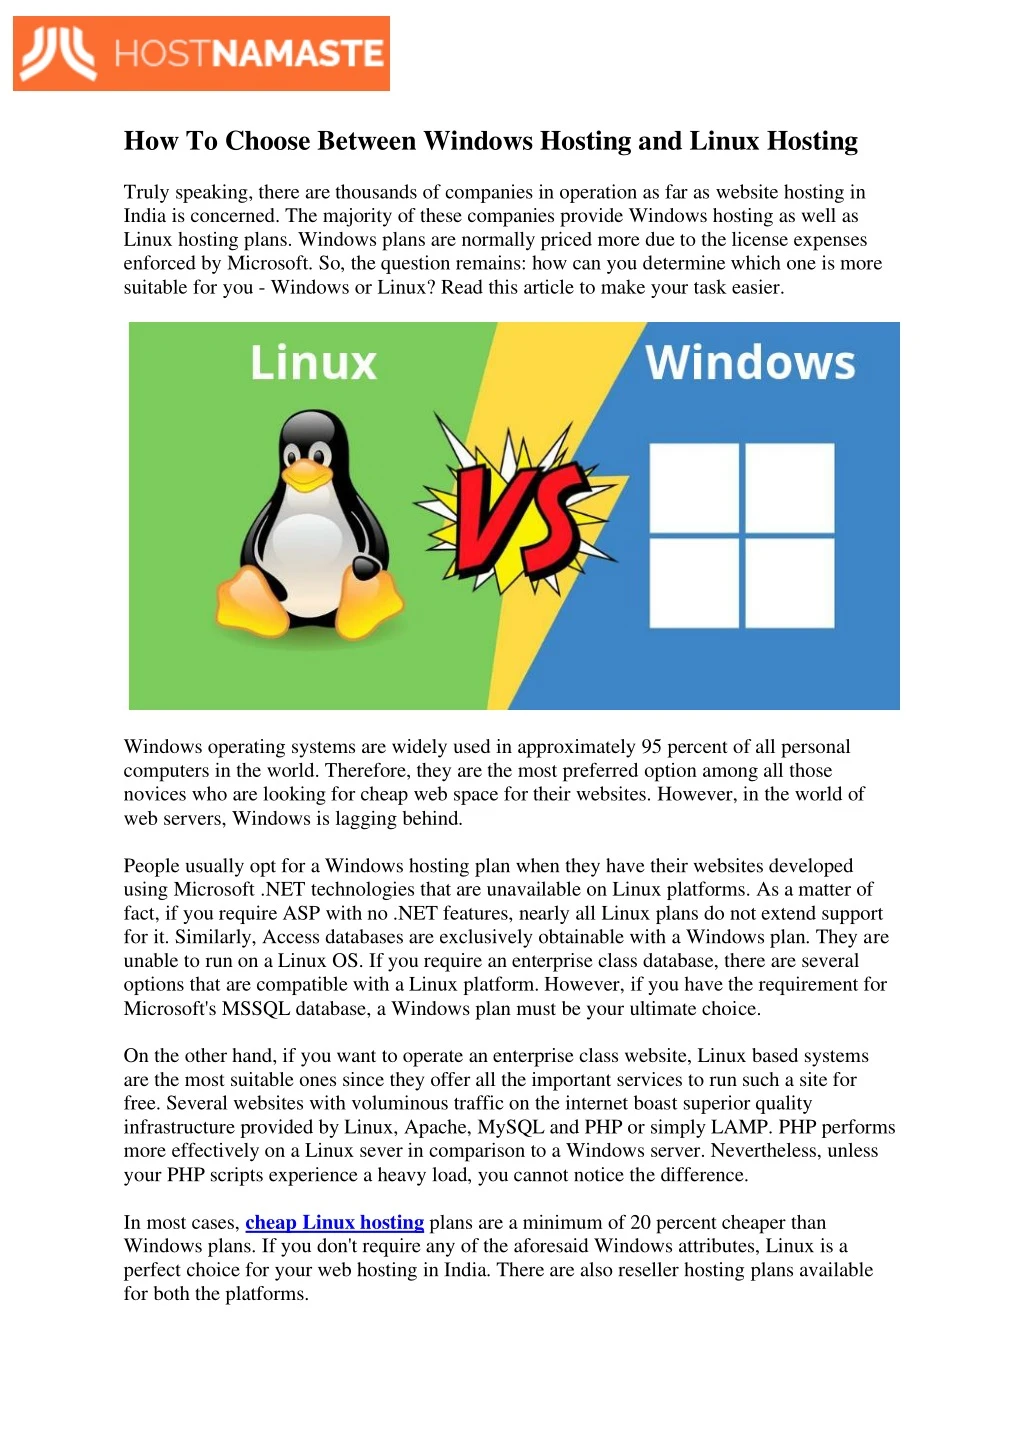 how to choose between windows hosting and linux